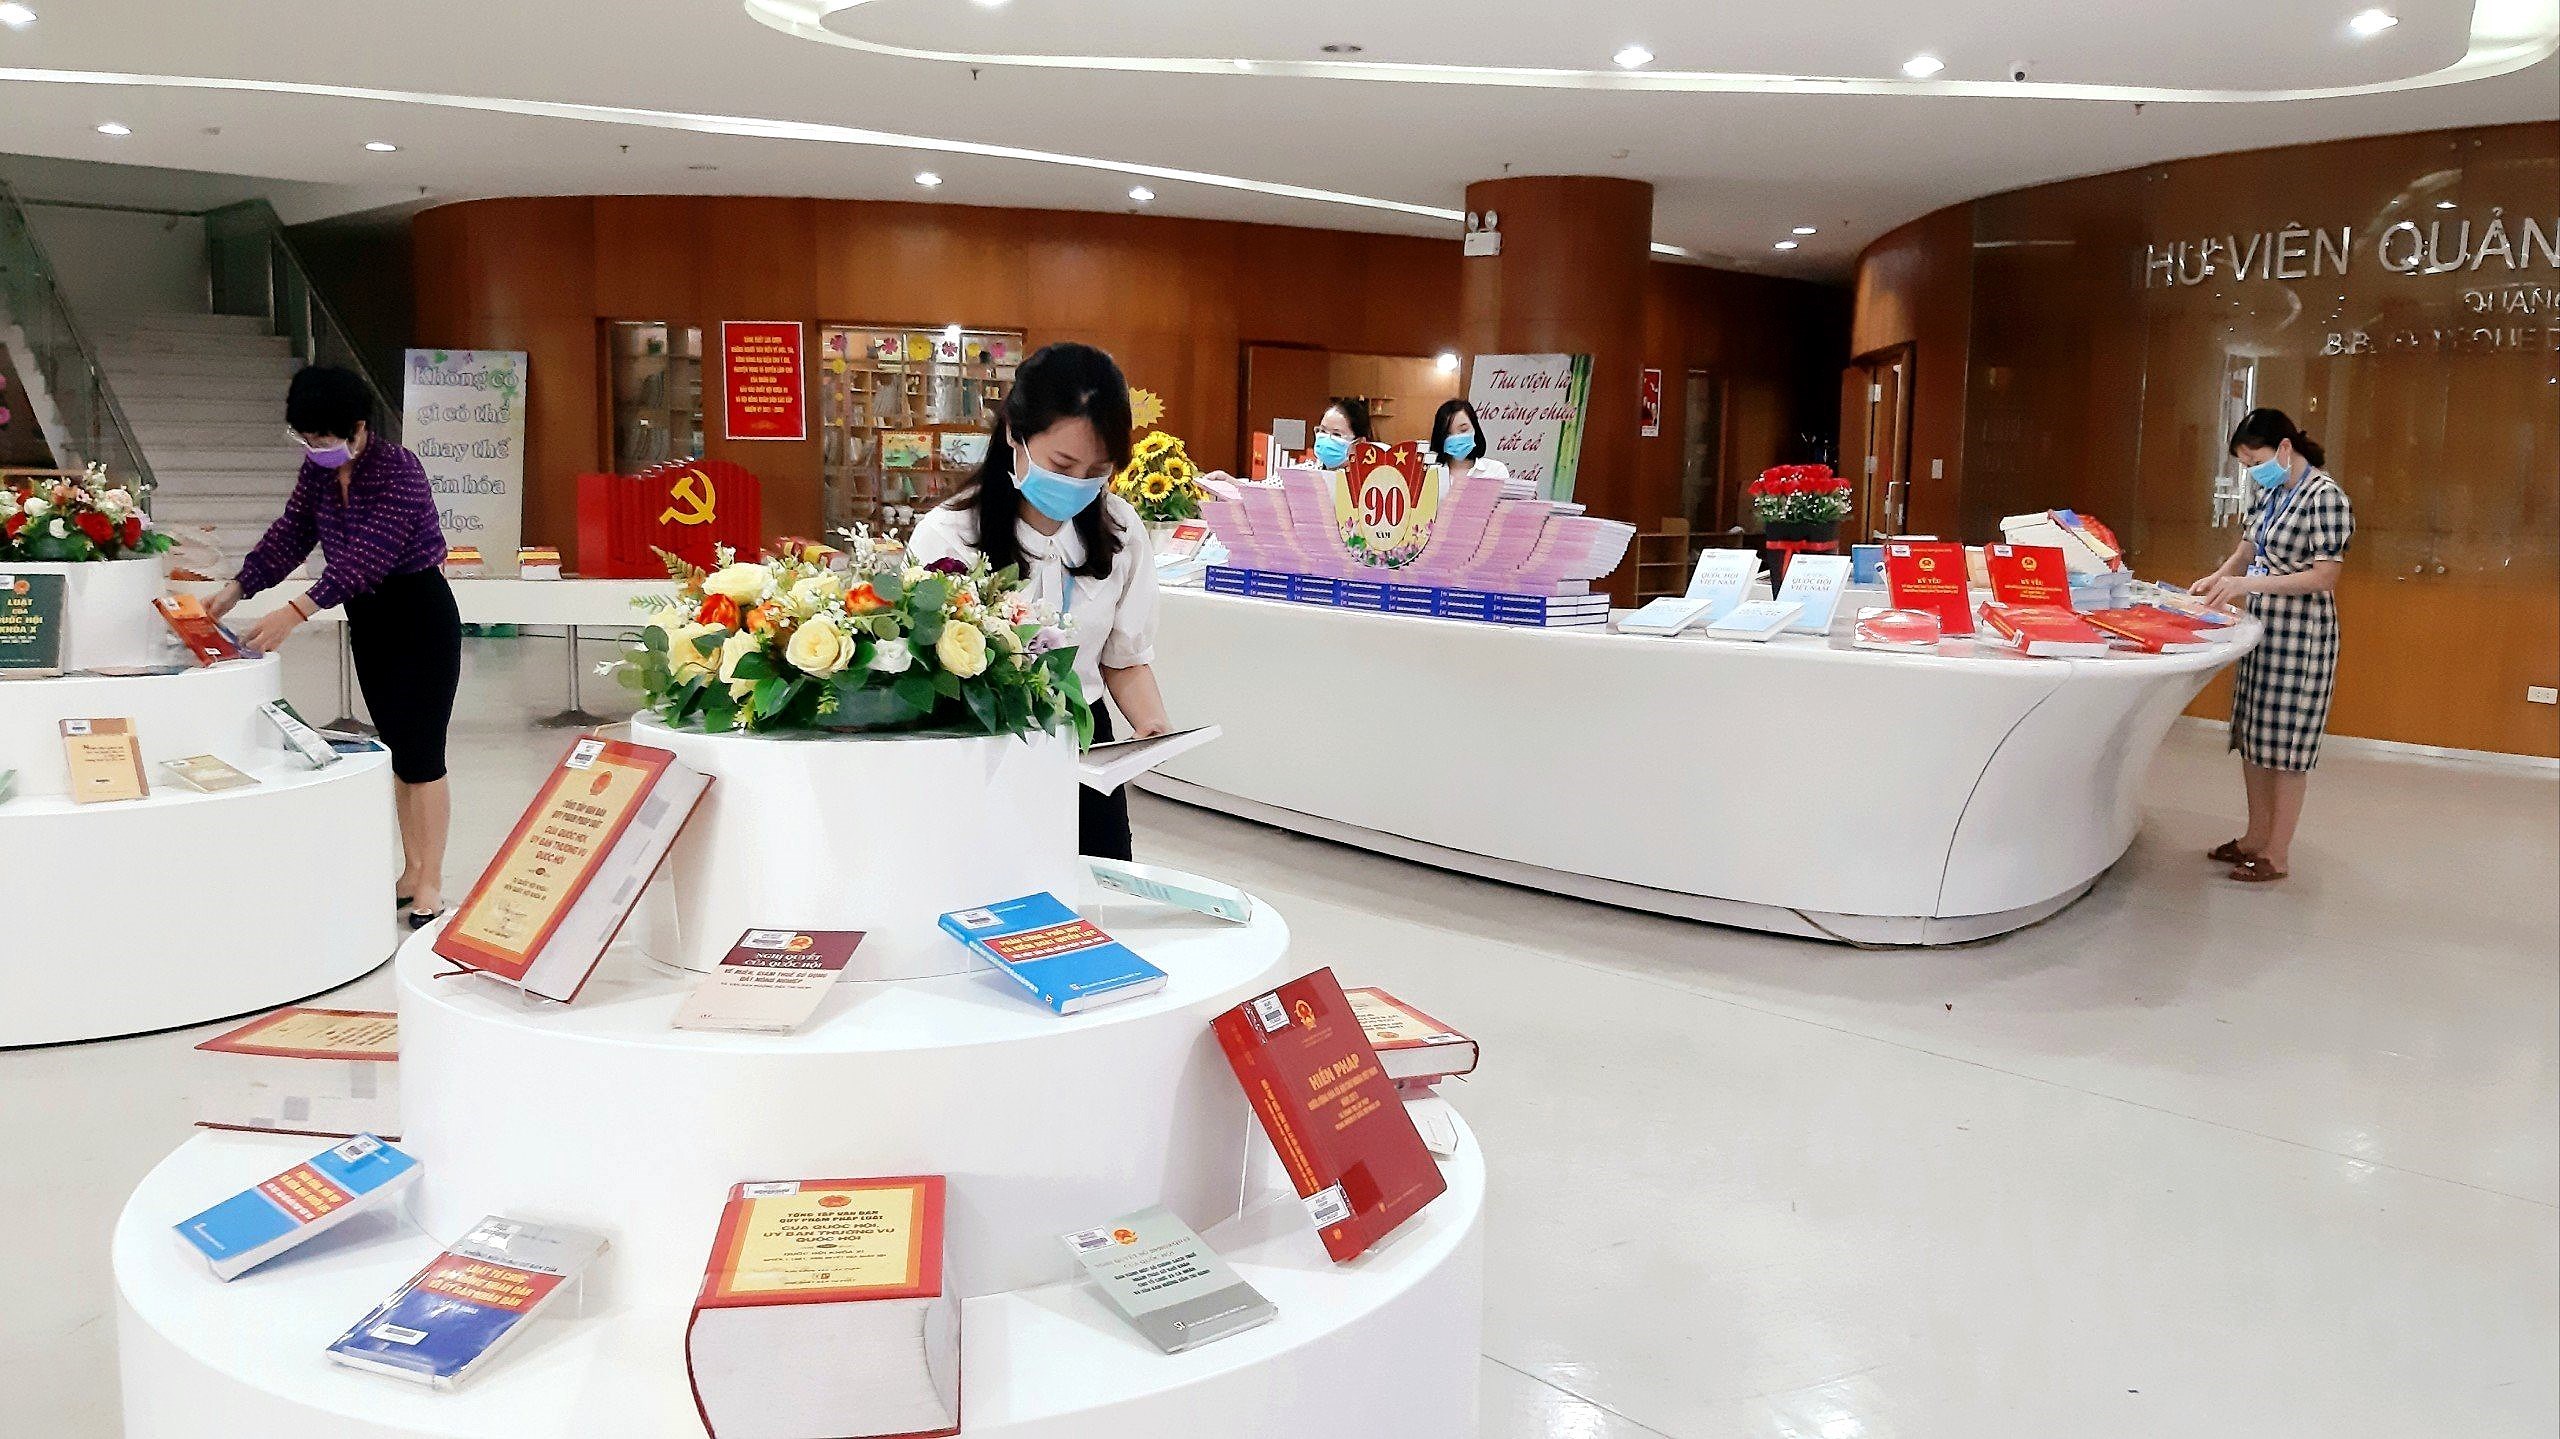 Books on election on display in Quang Ninh province hinh anh 3